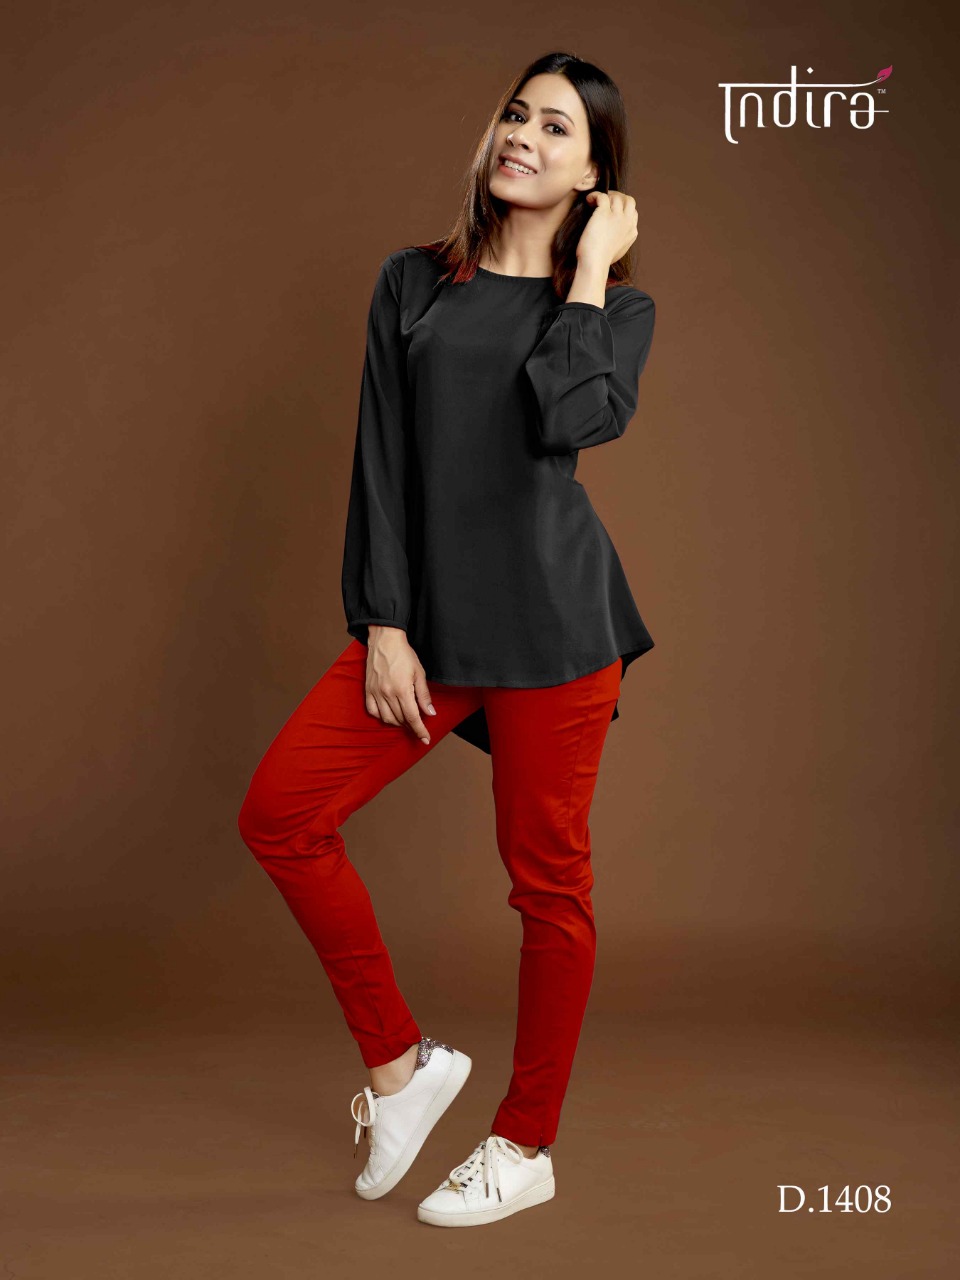 indira apparel forever colorful casual wear tops at reasonable rat